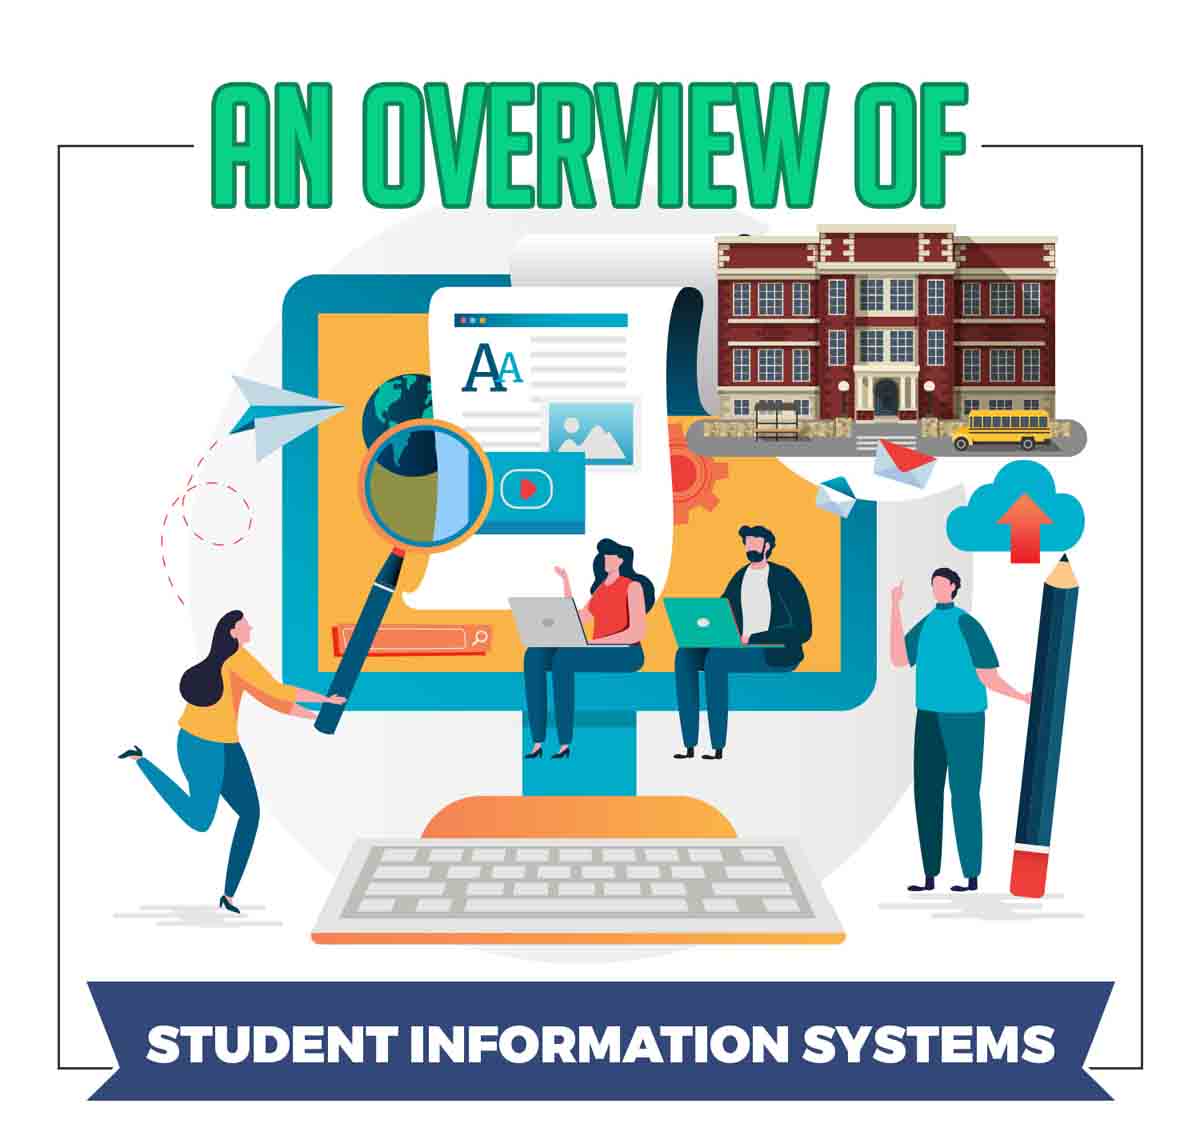 An Overview of Student Information Systems